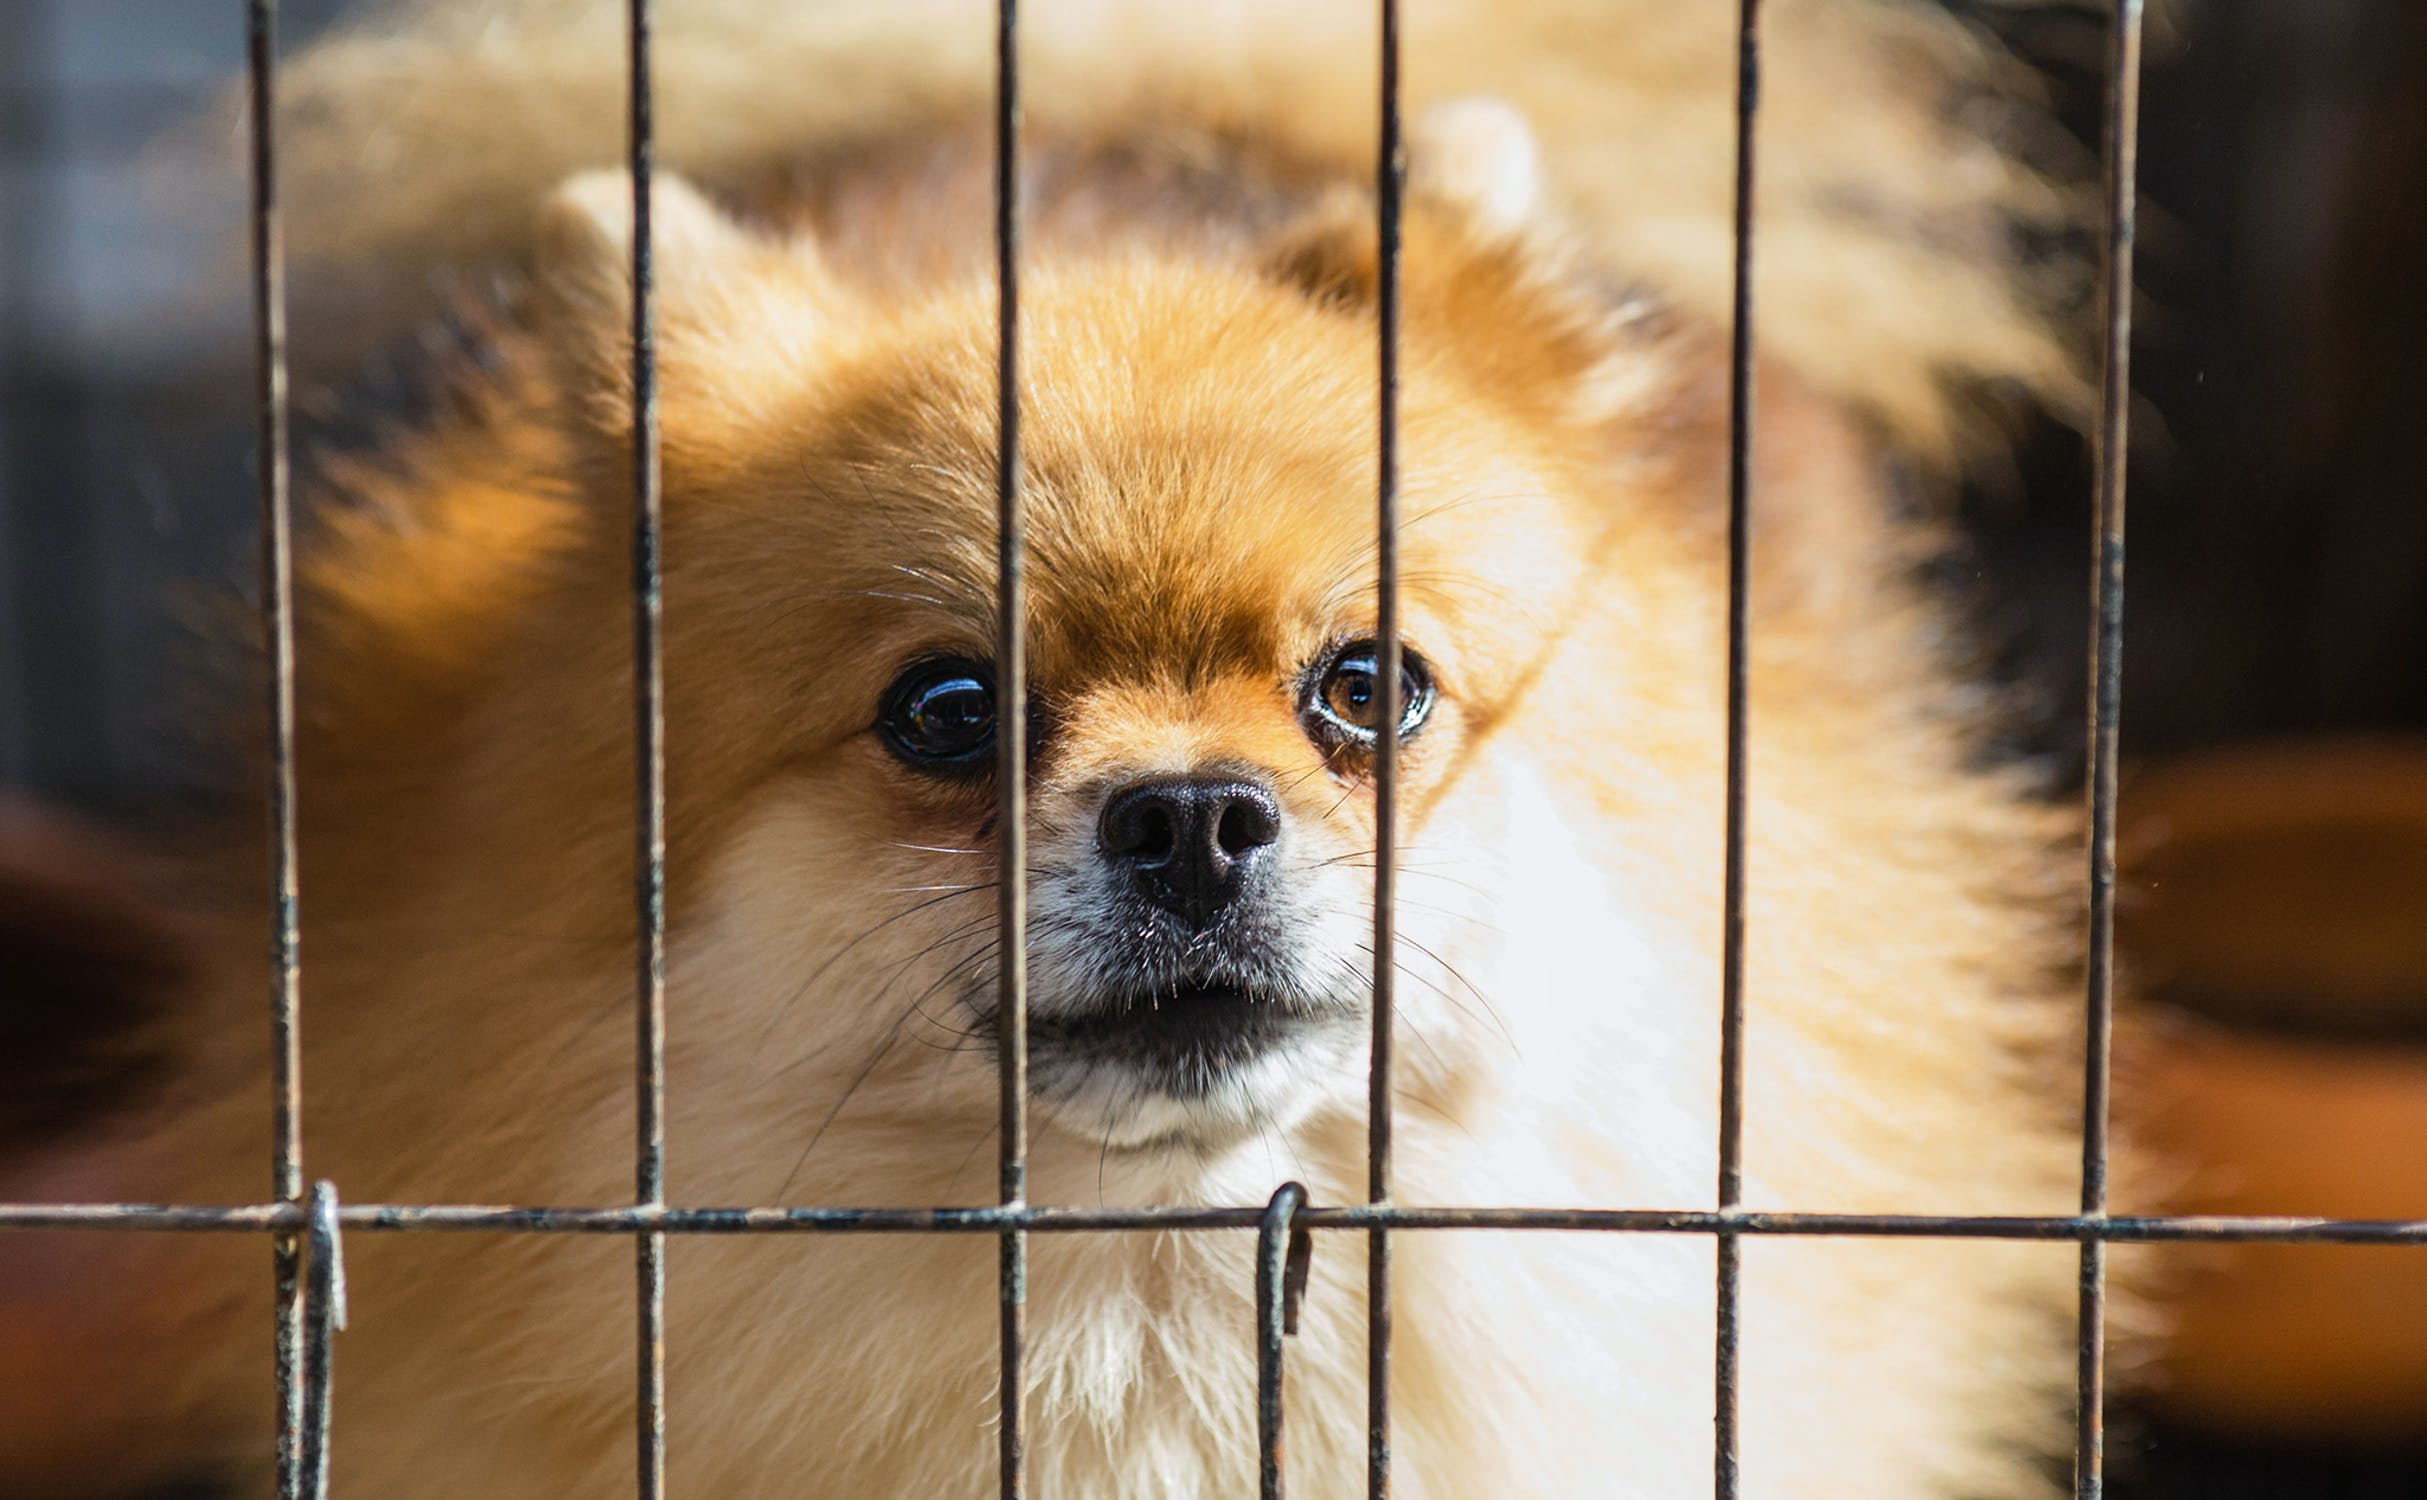 Animal Shelters Are Overwhelmed But You Can Help | LATF USA NEWS